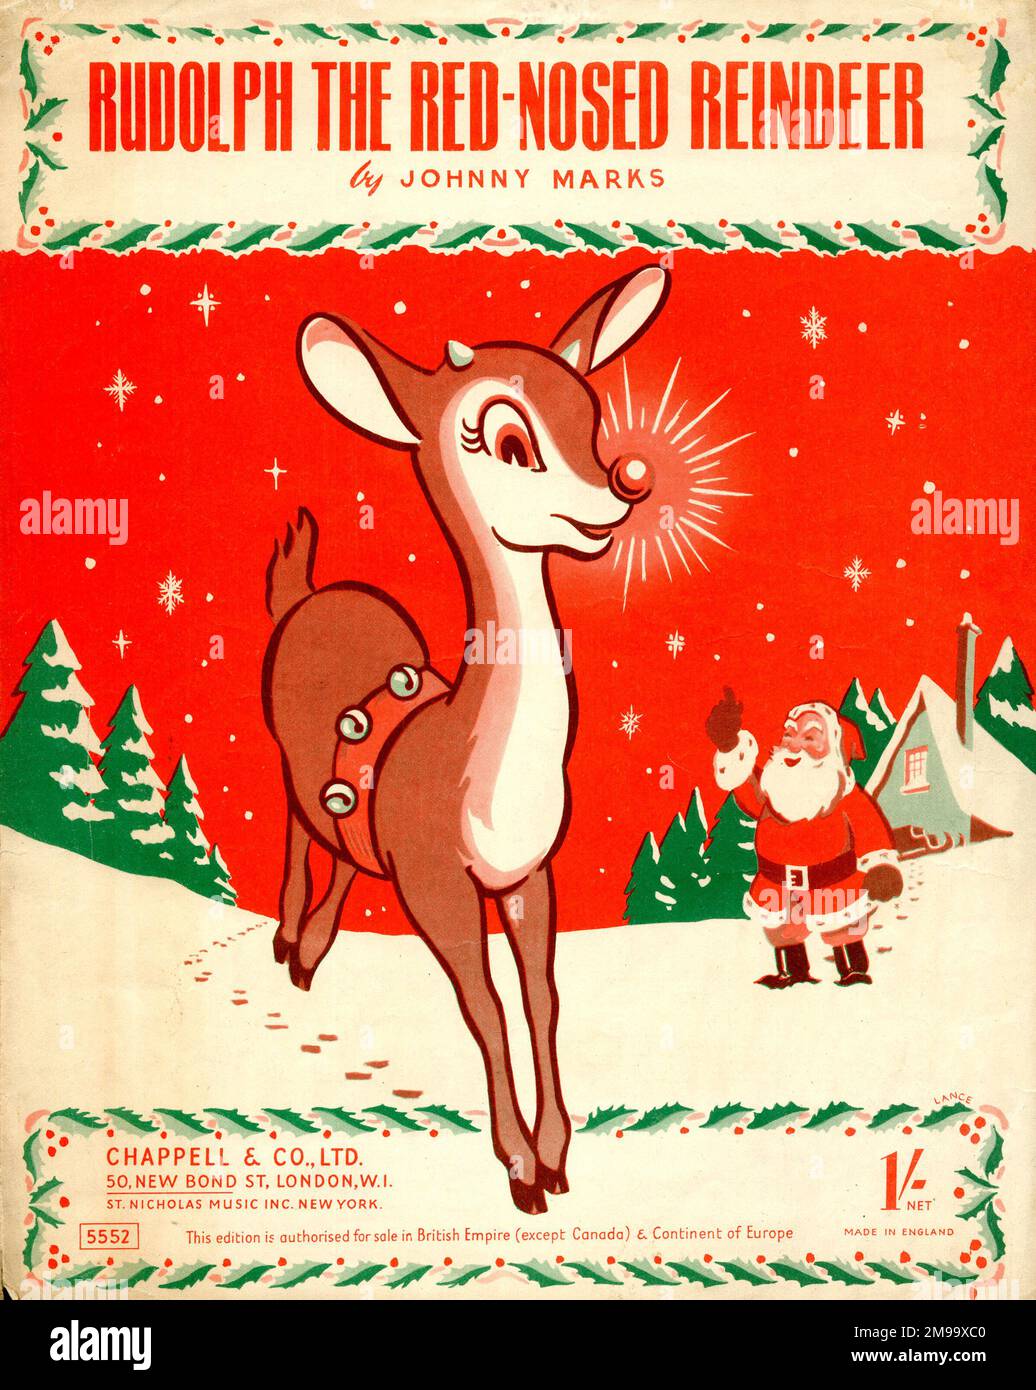 Music cover, Rudolph the Red-Nosed Reindeer, by Johnny Marks. Stock Photo